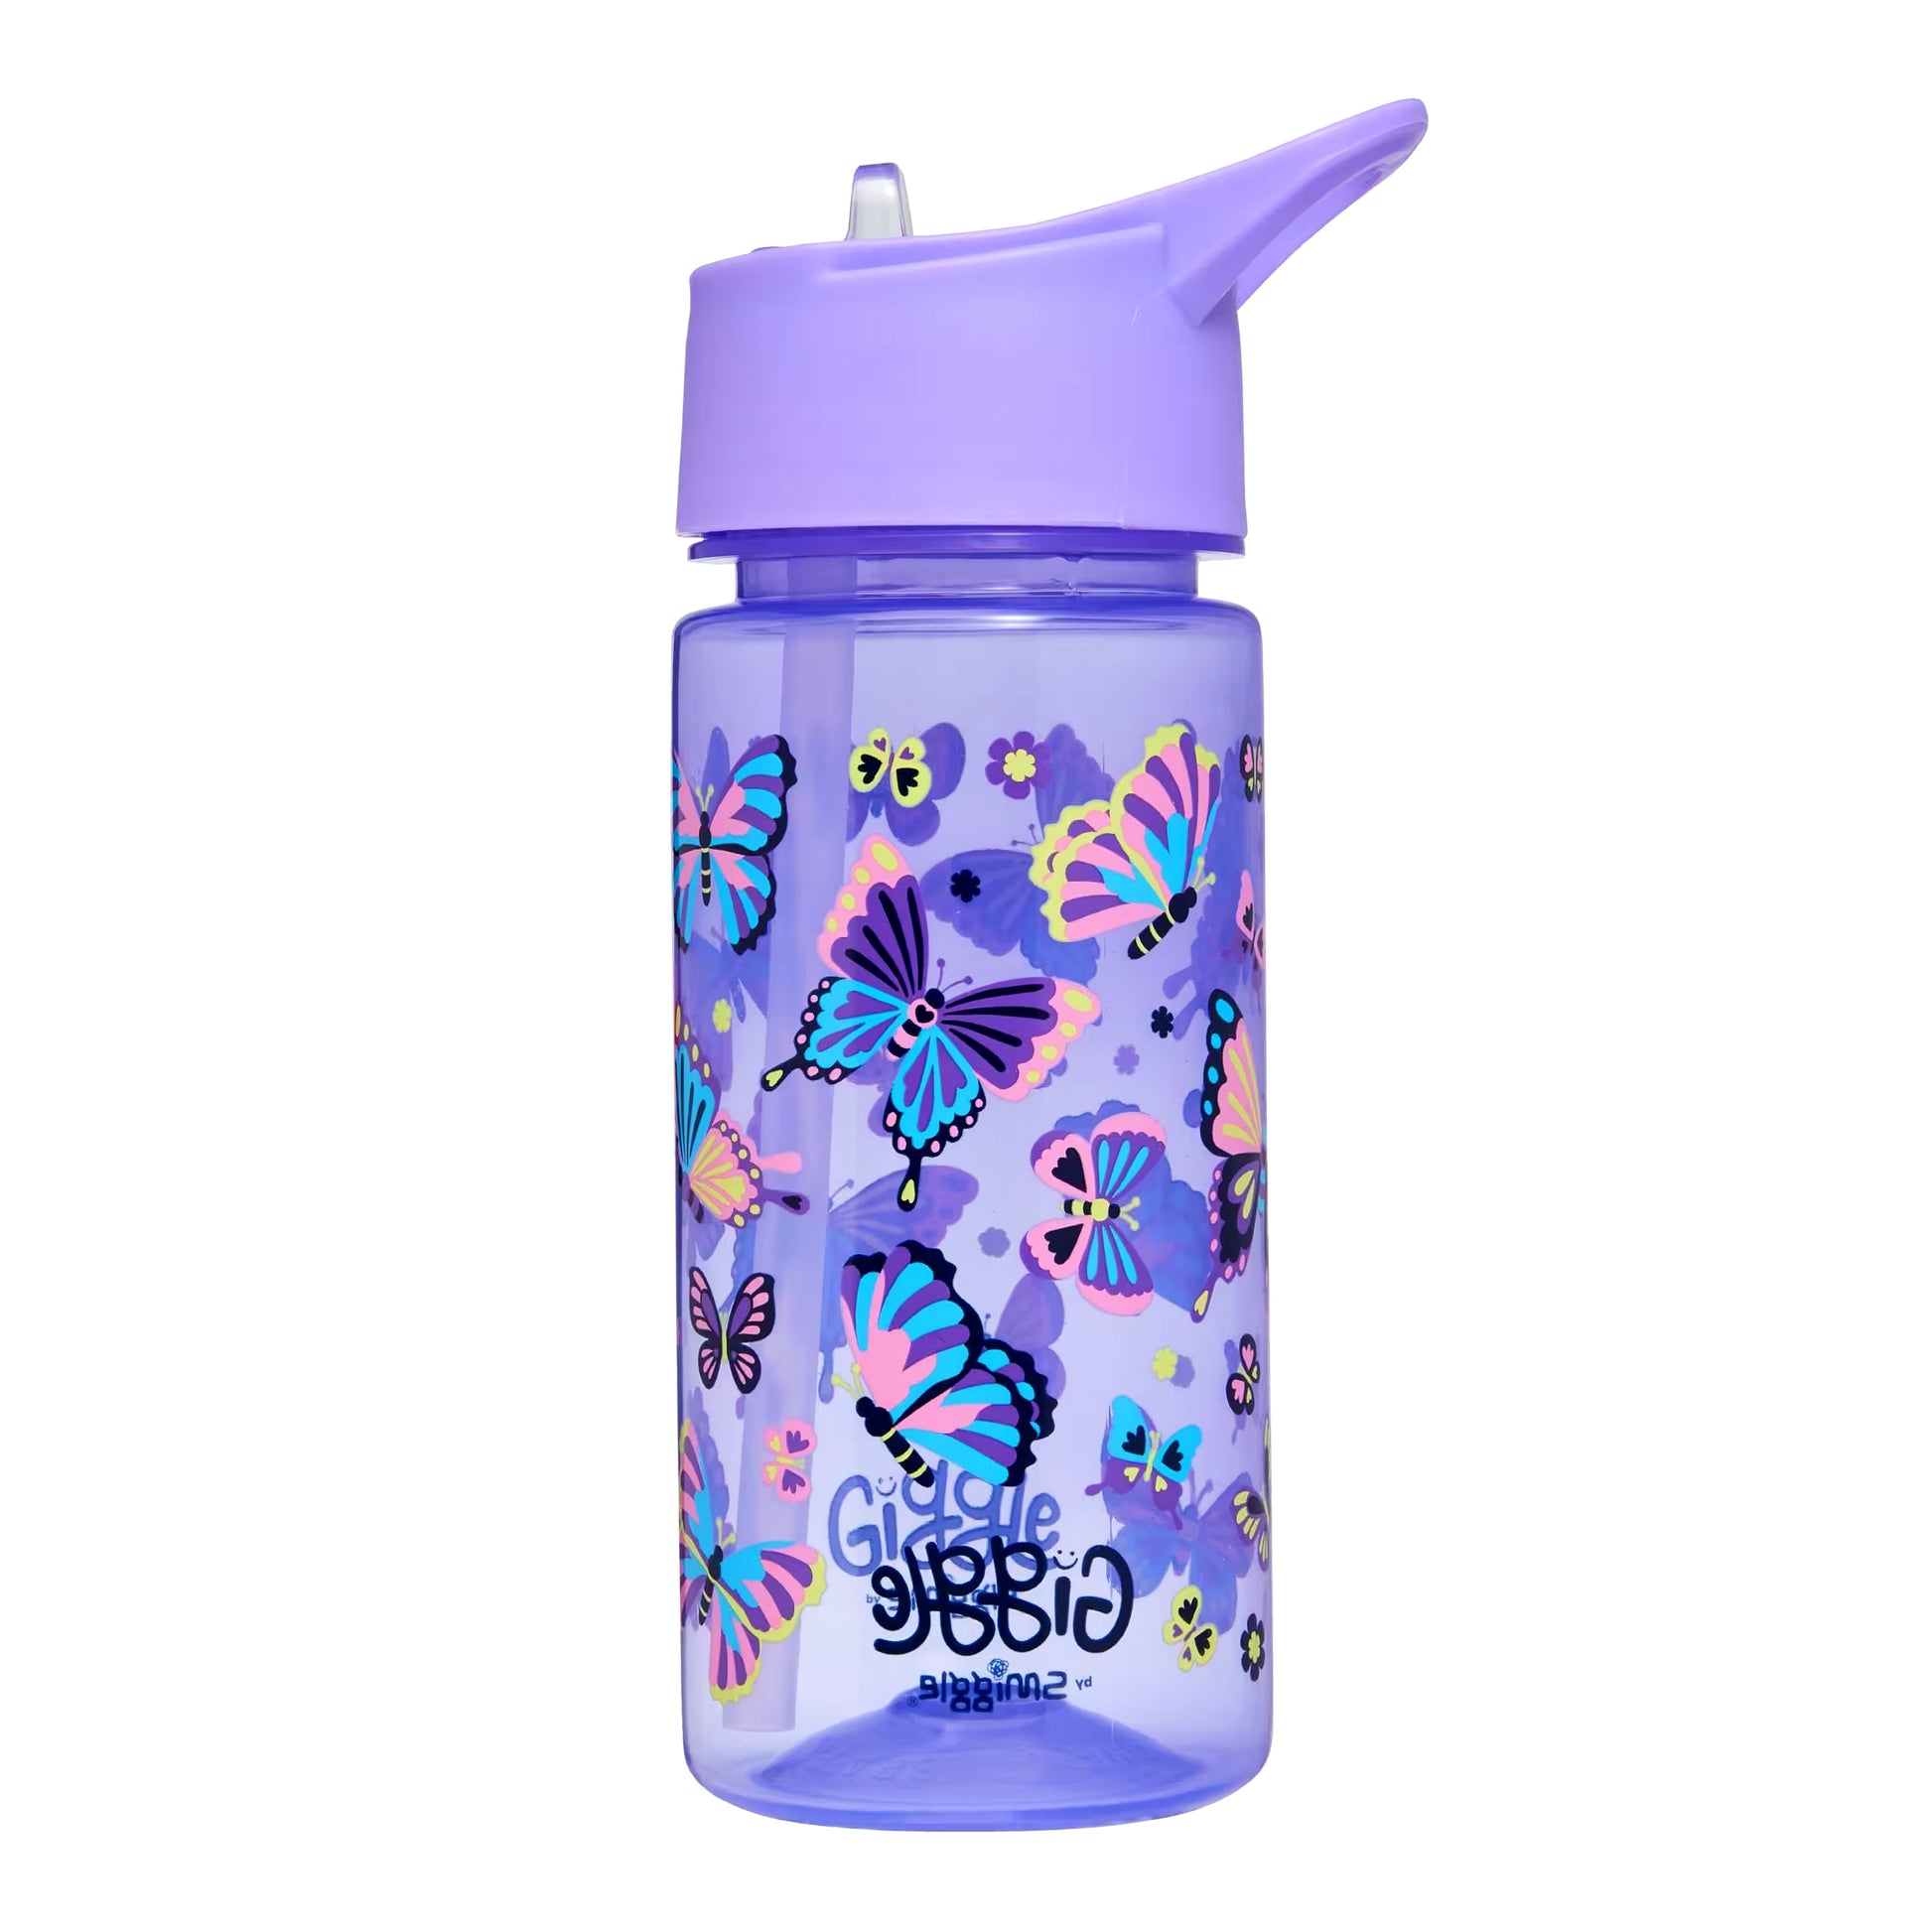 Giggle By Smiggle Plastic Drink Bottle 450ml - Lilac - Diaper Yard Gh